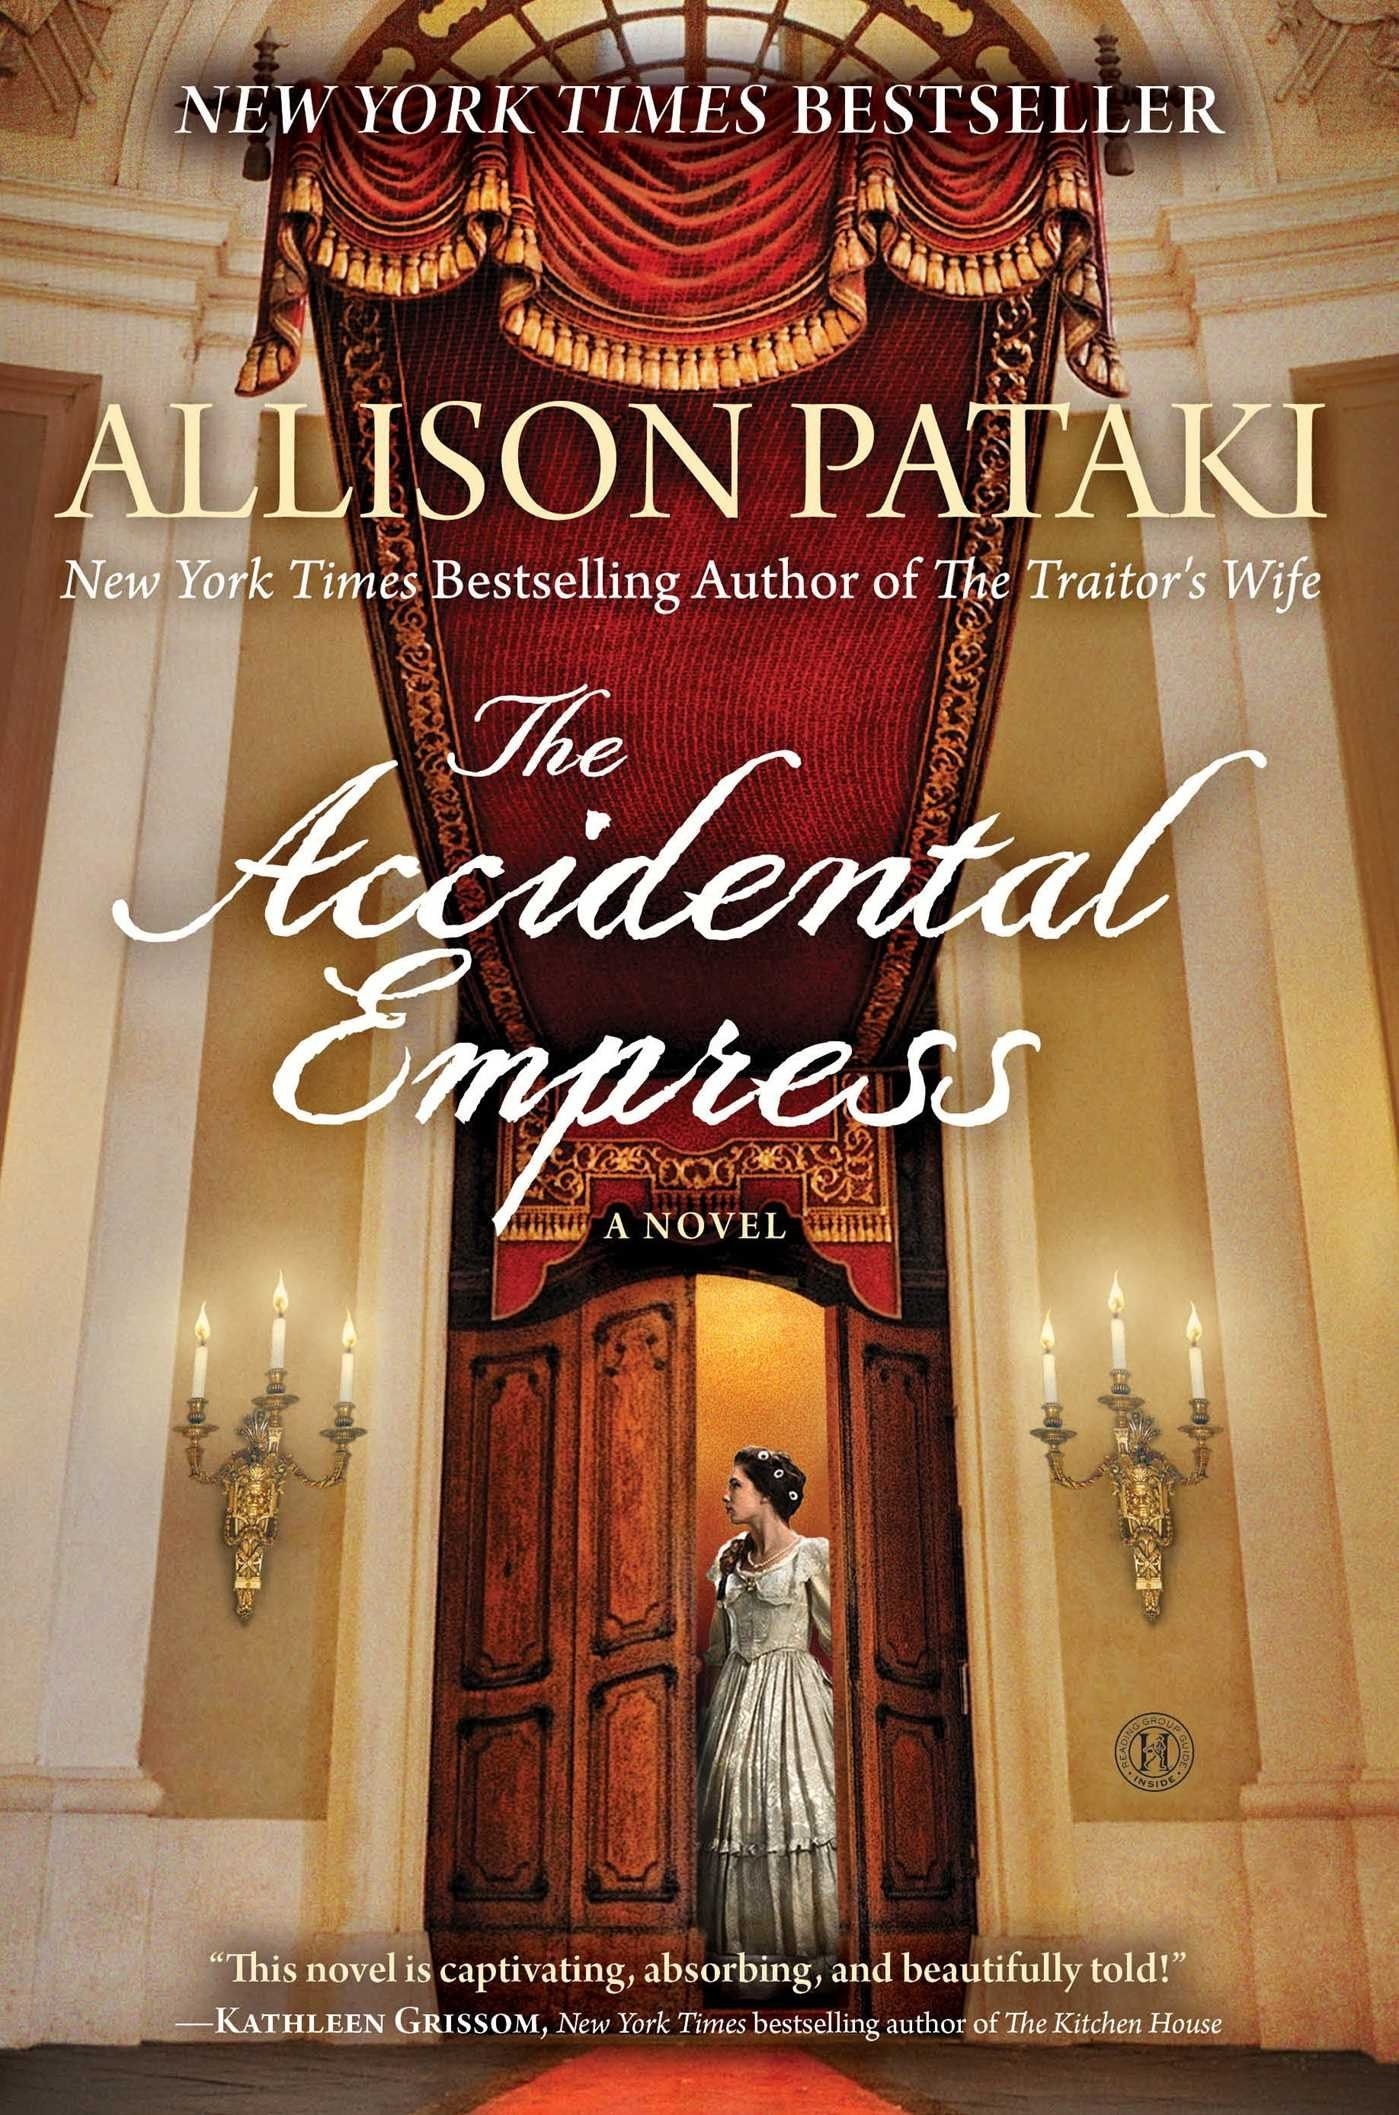 Book: The Accidental Empress by Allison Pataki